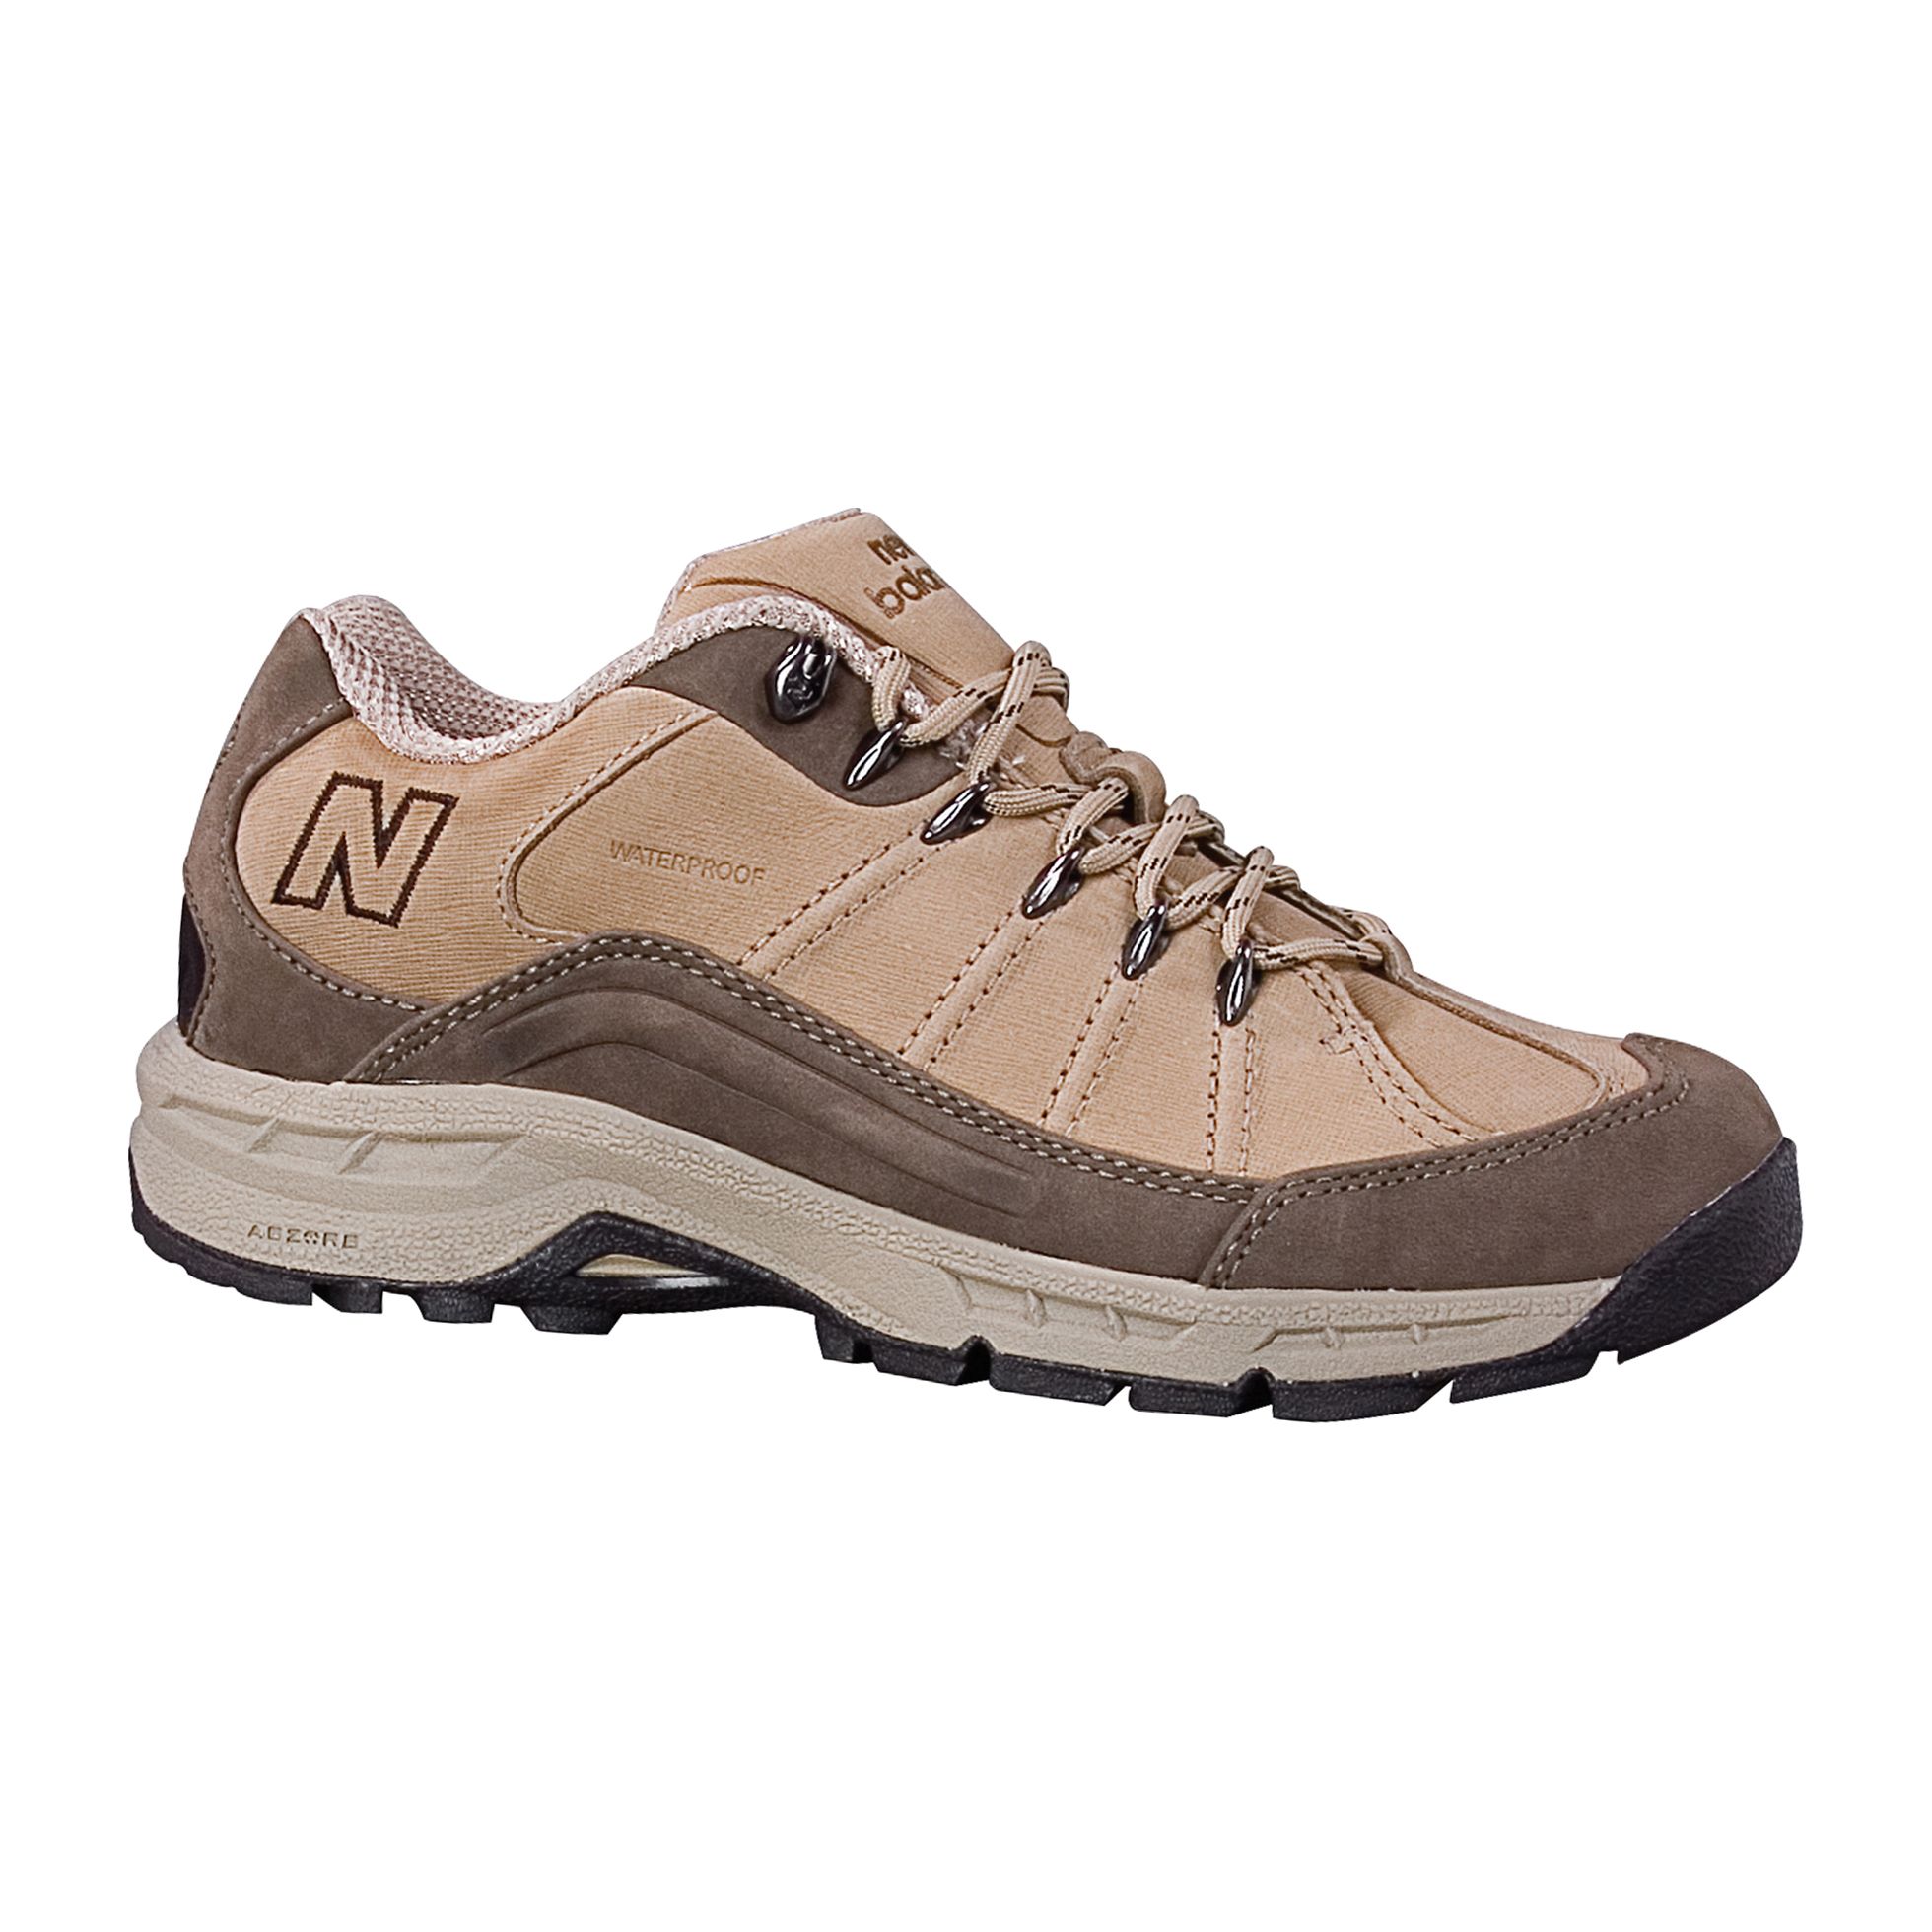 New Balance Women's Country 966 Shoe - Brown - Clothing, Shoes \u0026 Jewelry -  Shoes - Women's Shoes - Women's Sneakers \u0026 Athletic Shoes